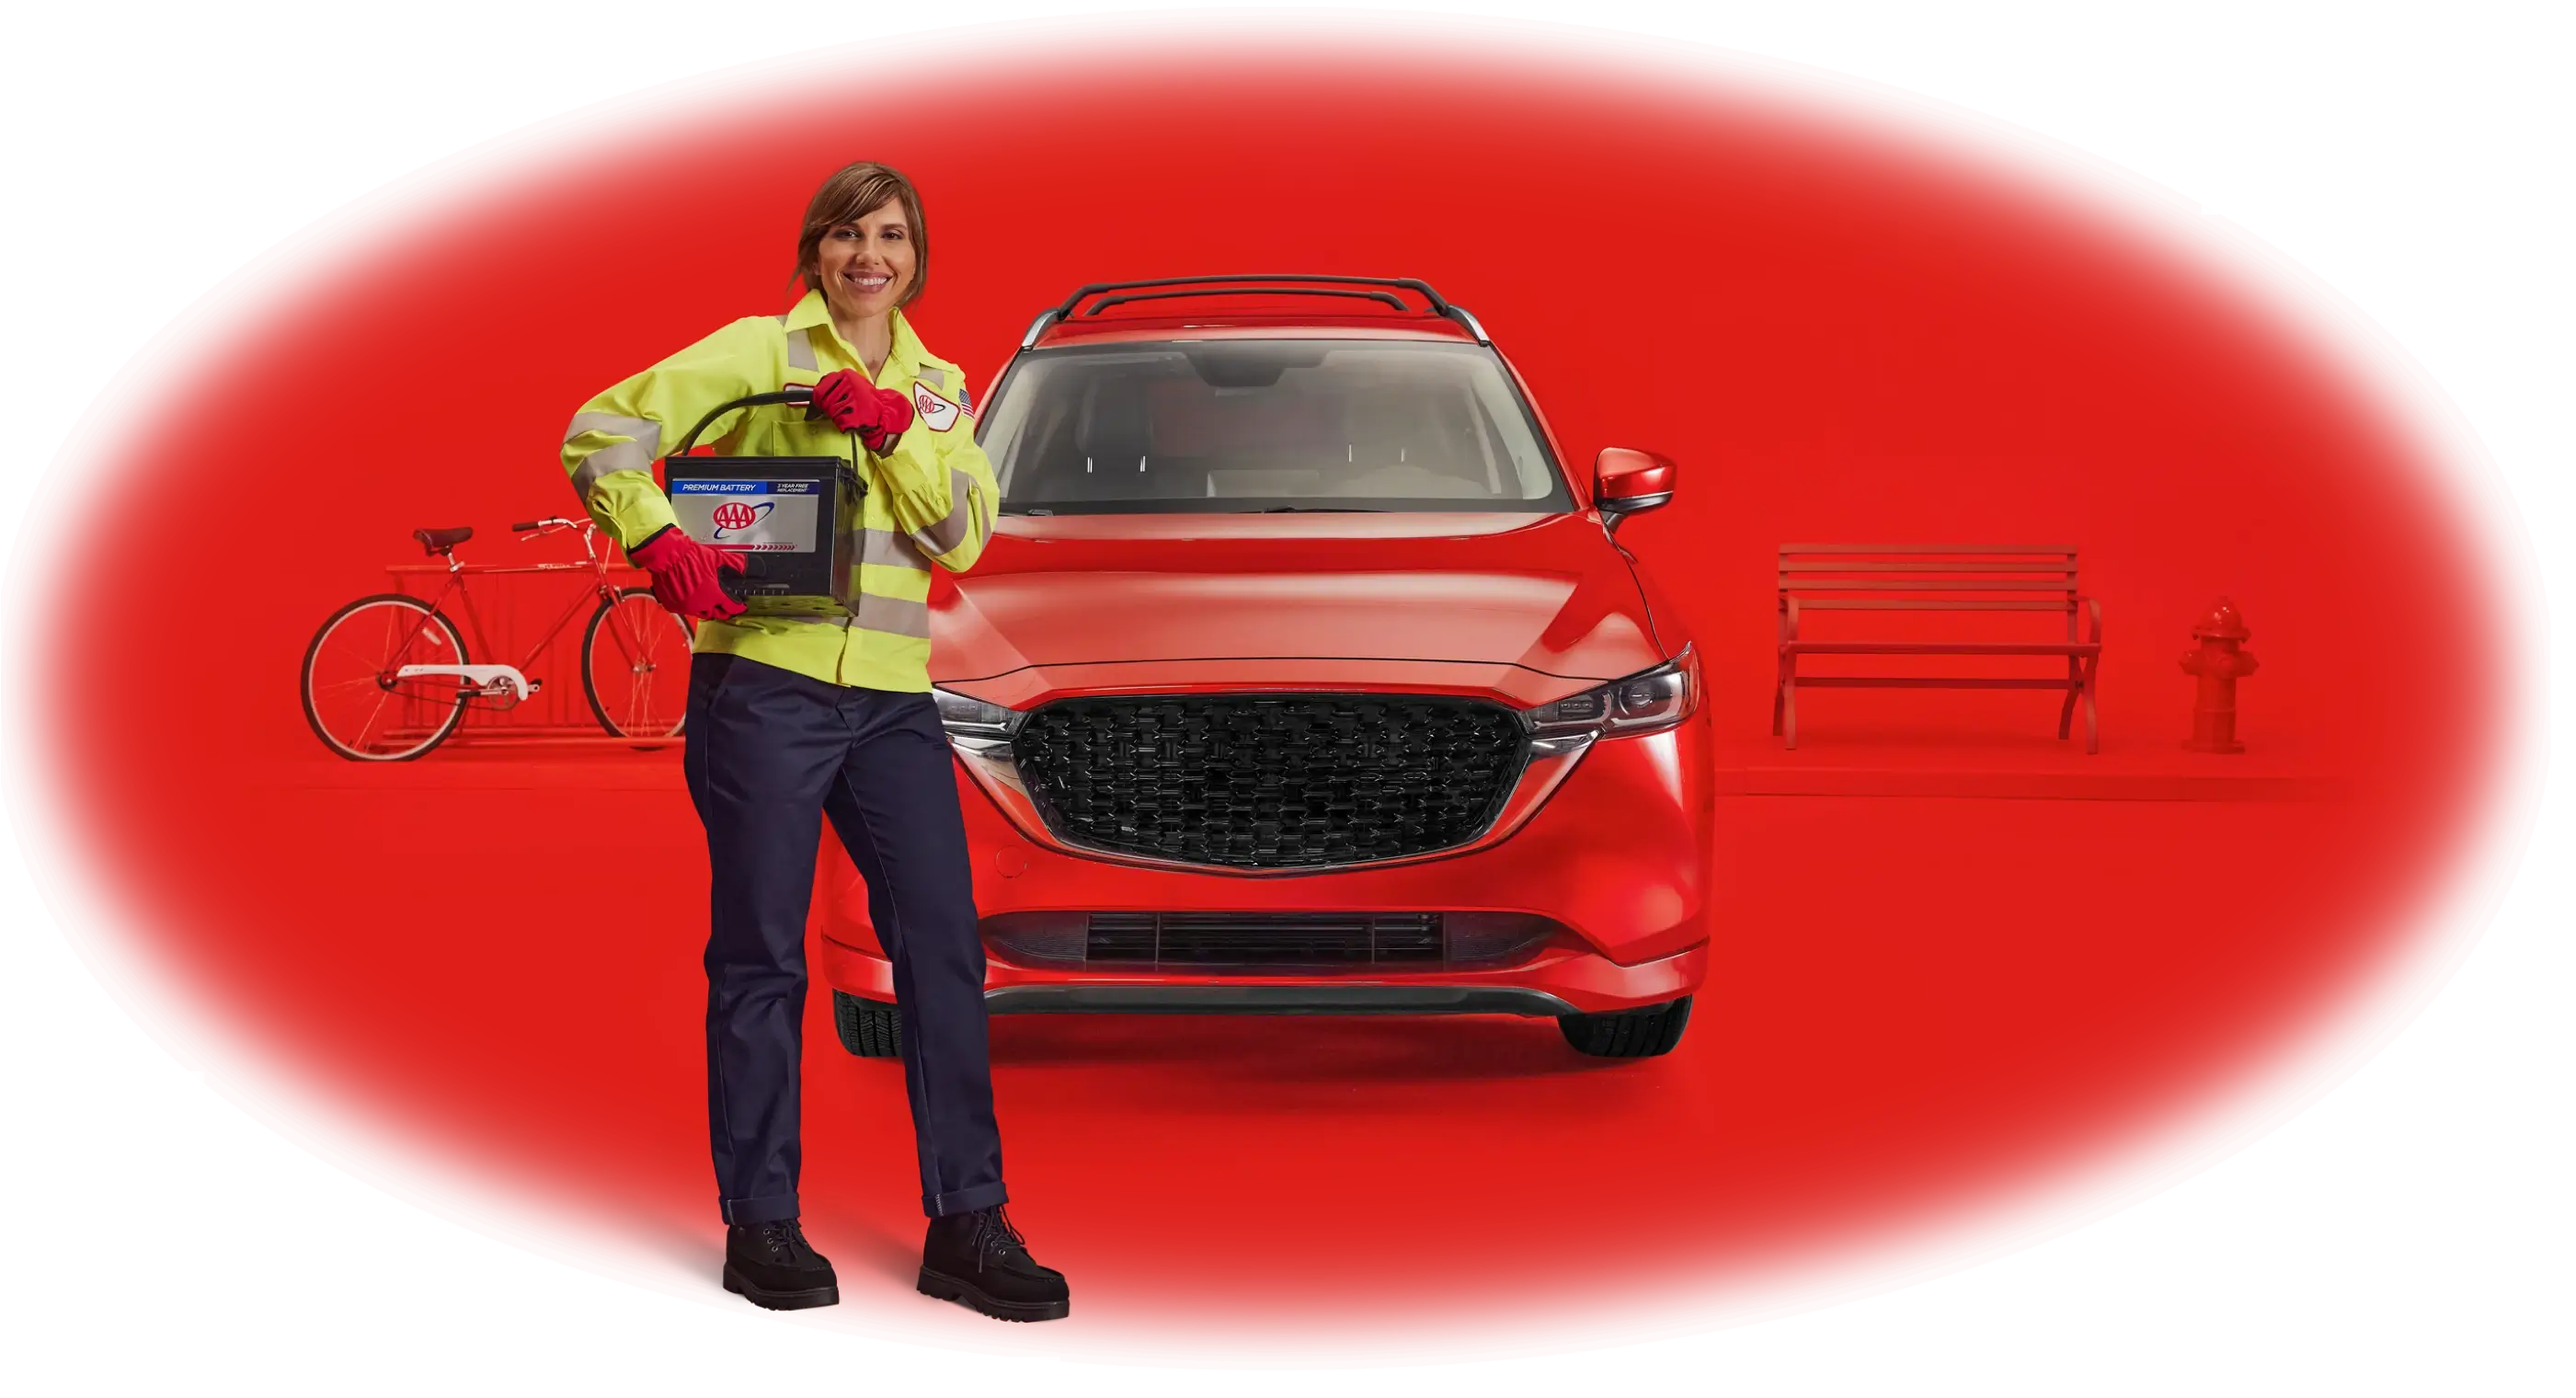 Smiling woman in yellow safety vest holding a AAA car battery, standing in front of a red SUV with a bicycle and bench in the background, all on a red backdrop